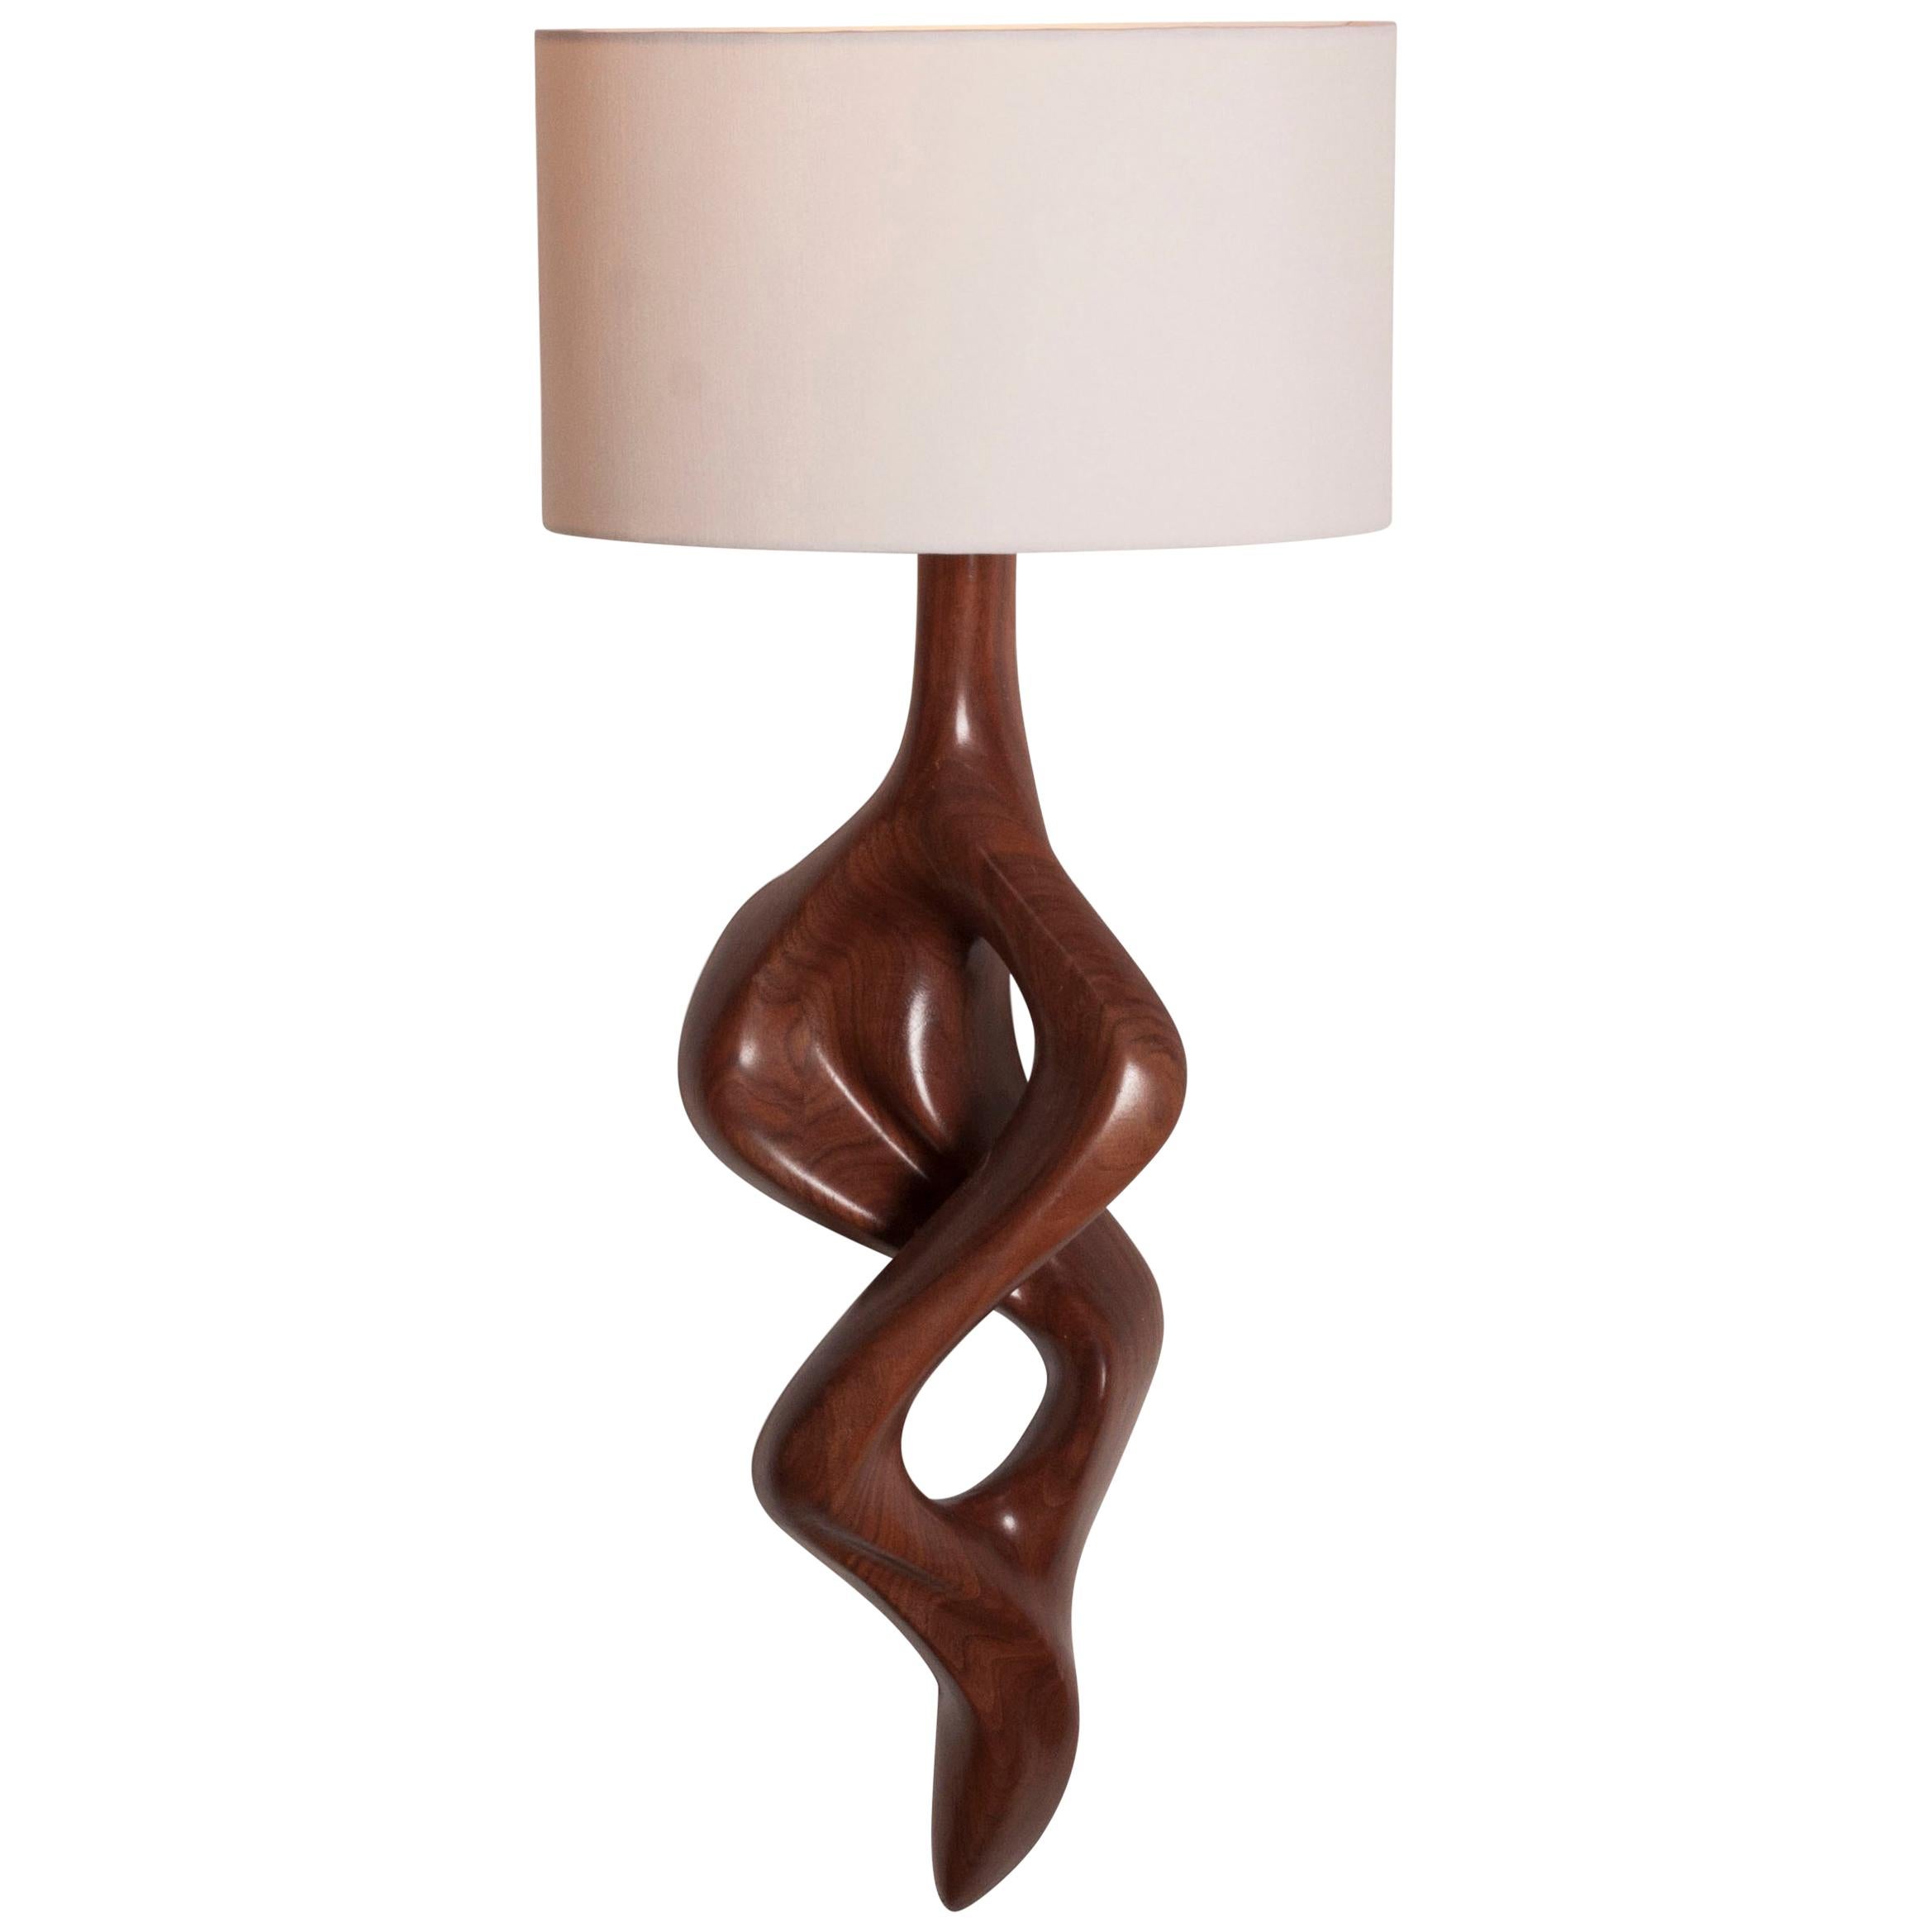 Amorph Nomi Sconces Natural stain on Walnut wood with Ivory Shade